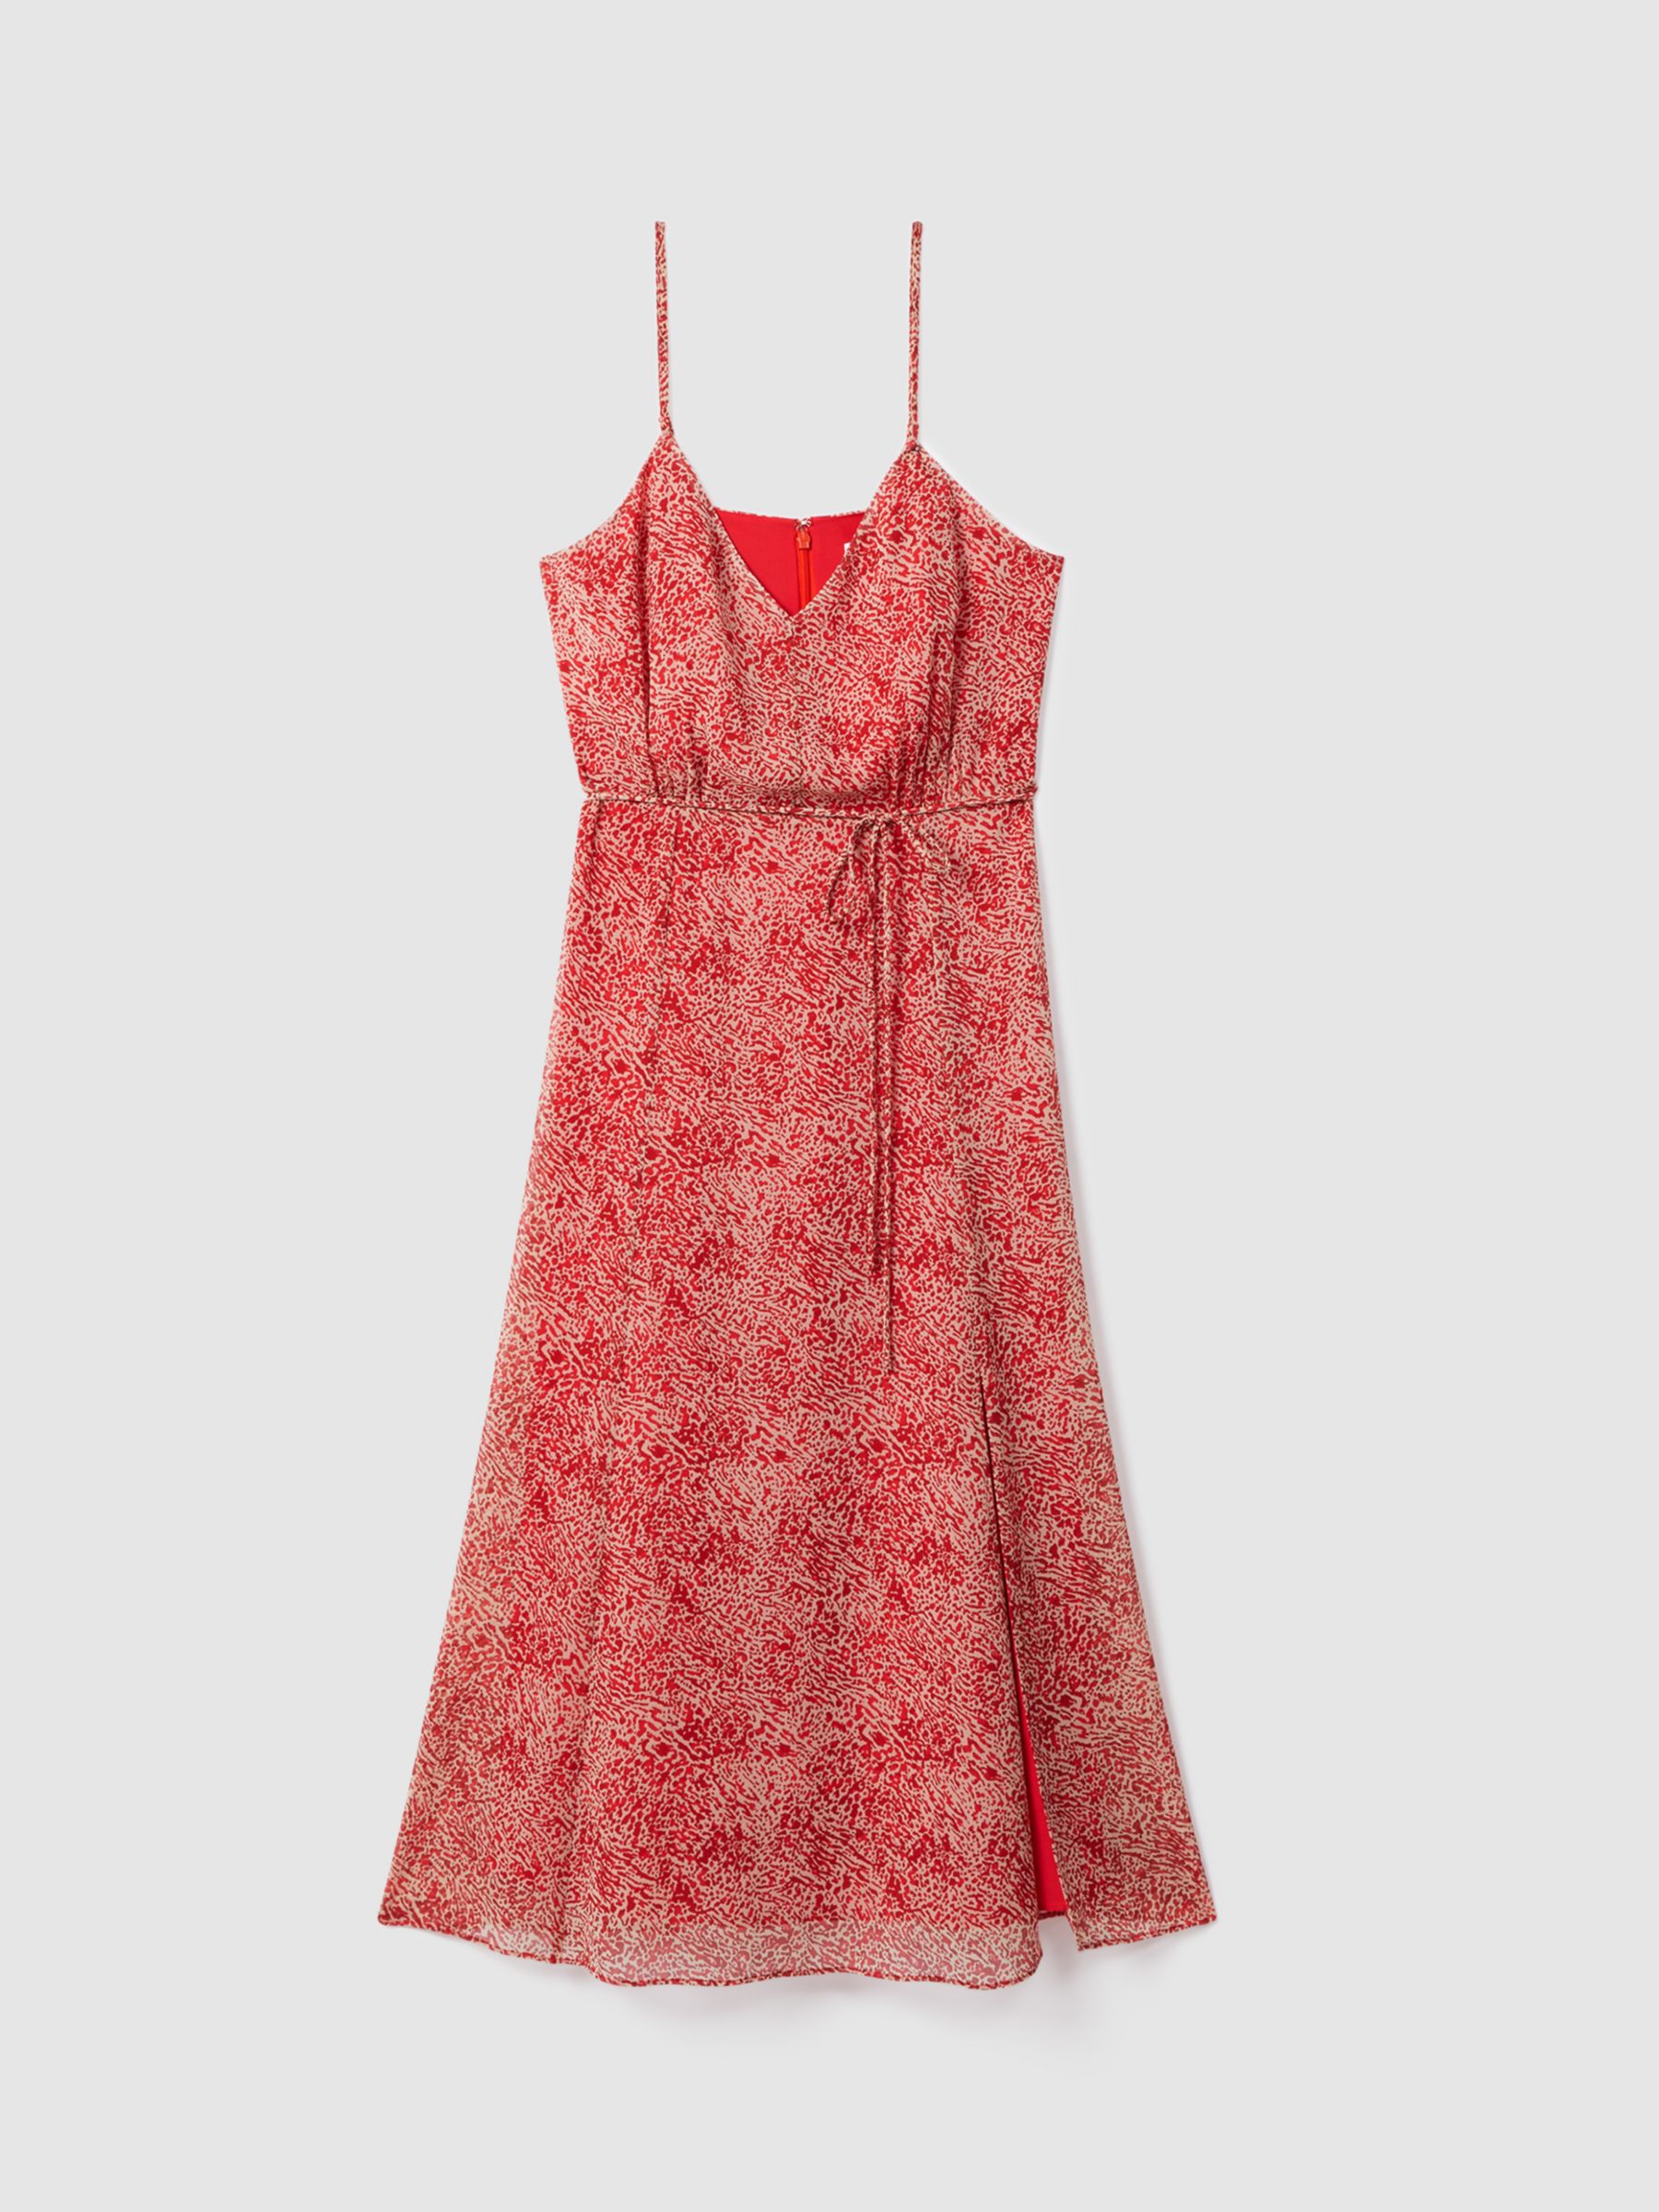 Reiss Olivia Abstract Print Strappy Midi Dress, Red/Nude, 14